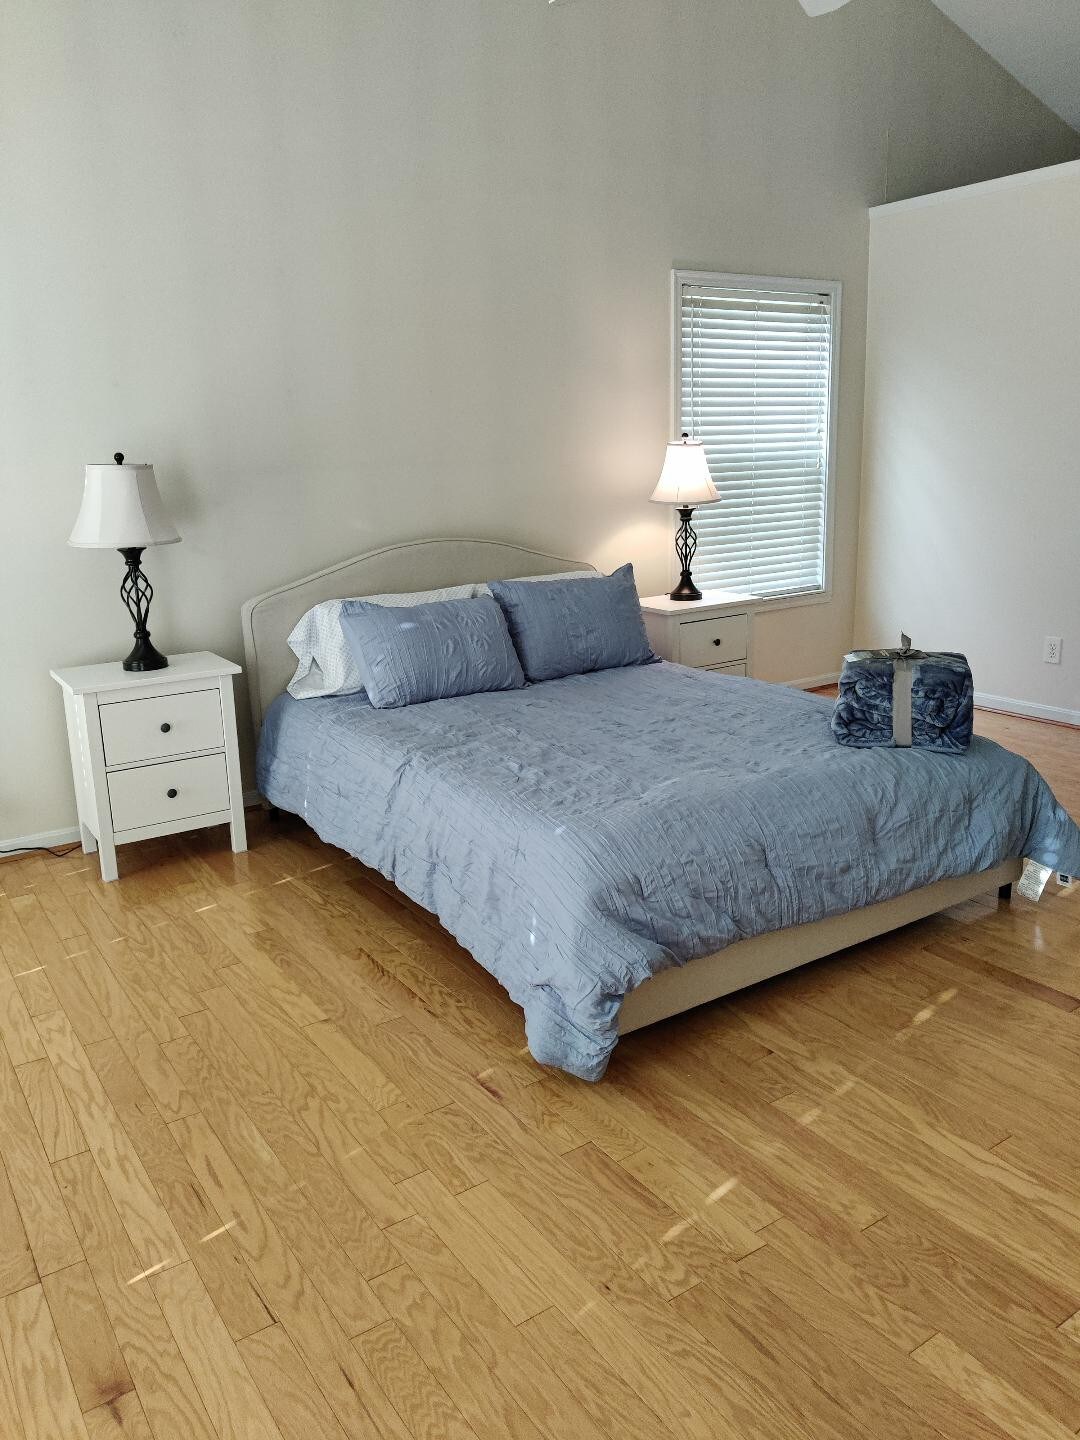 Gorgeous 1-5 bedrooms (rent what you need)